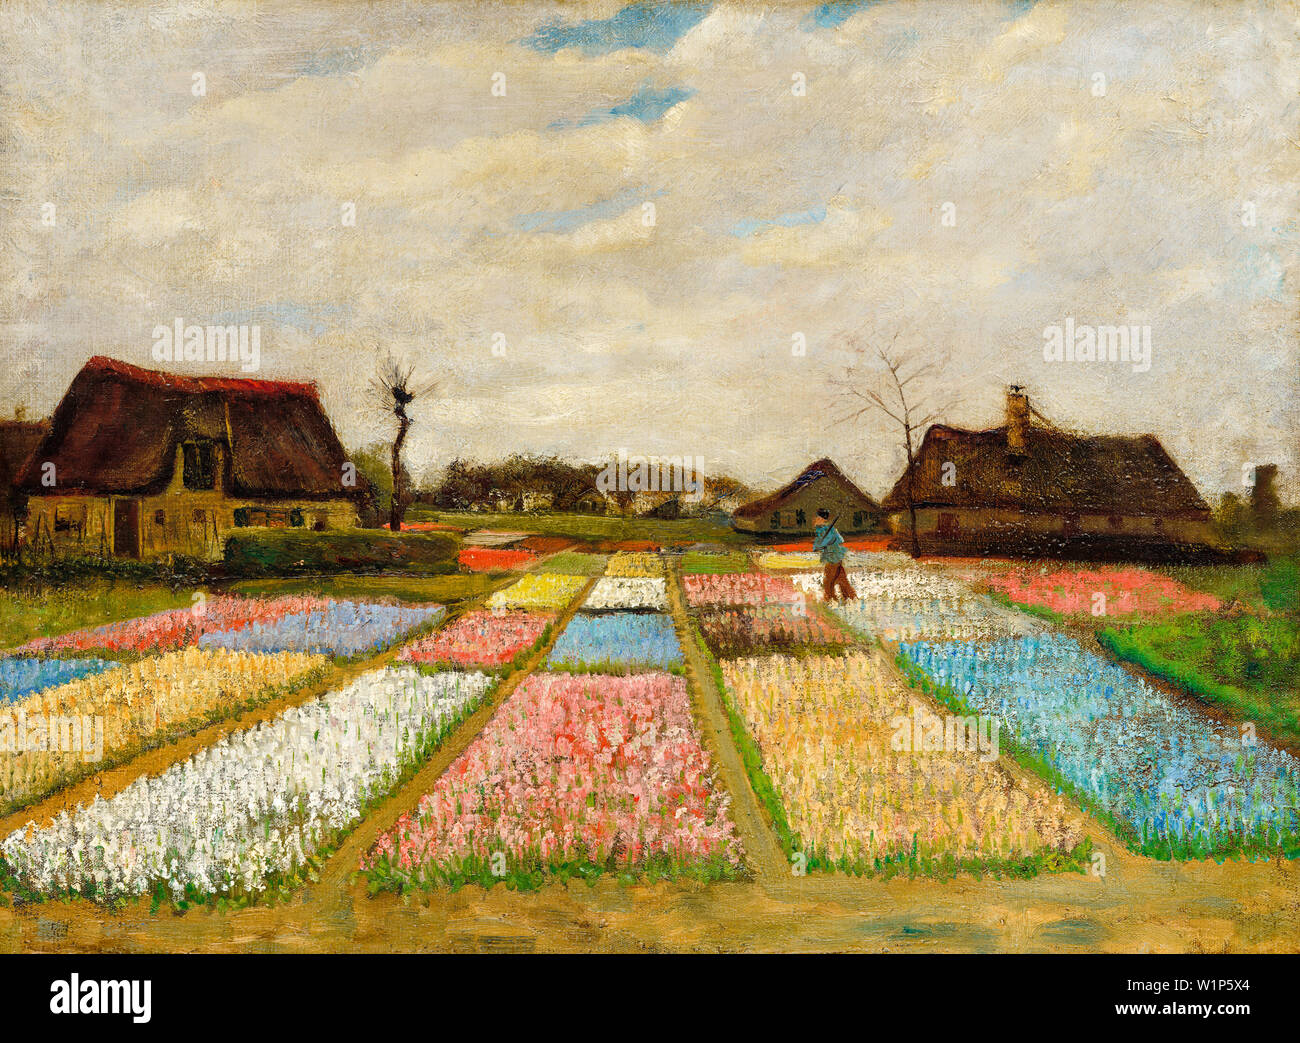 Vincent Van Gogh, Flower Beds in Holland, Bulb Fields, landscape painting, 1883 Stock Photo